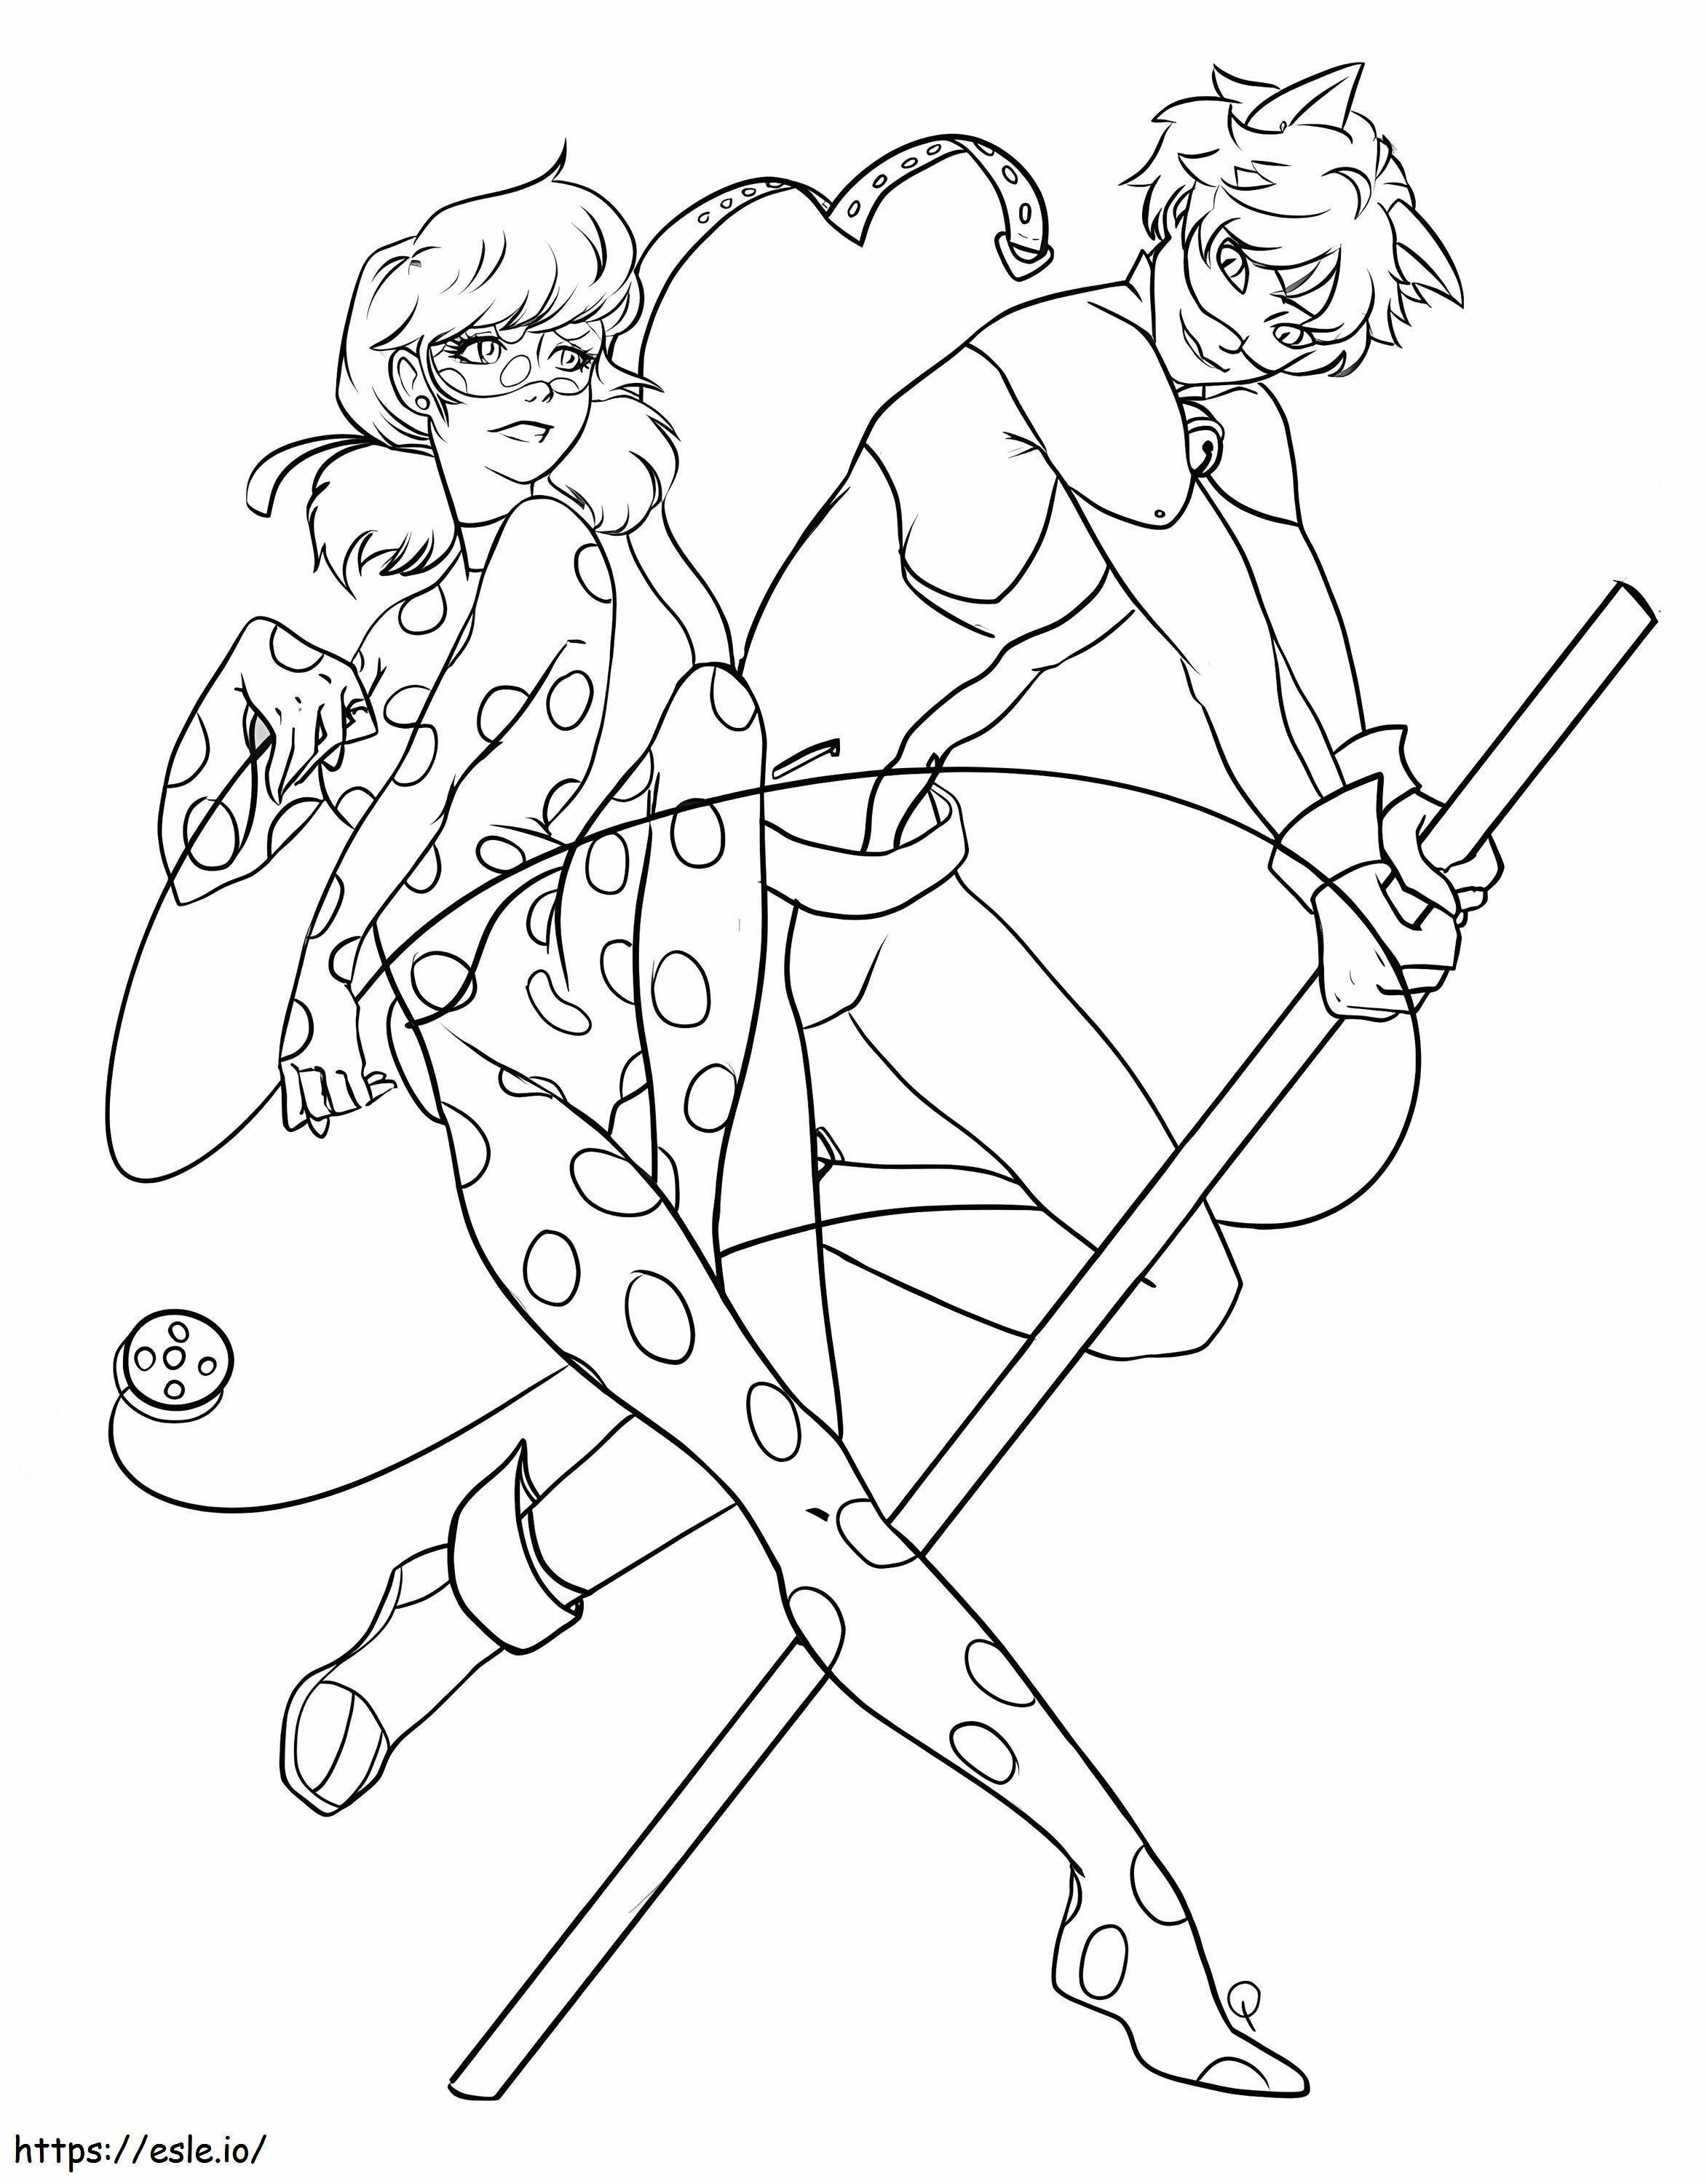 Miraculous Ladybug And Cat Noir coloring page